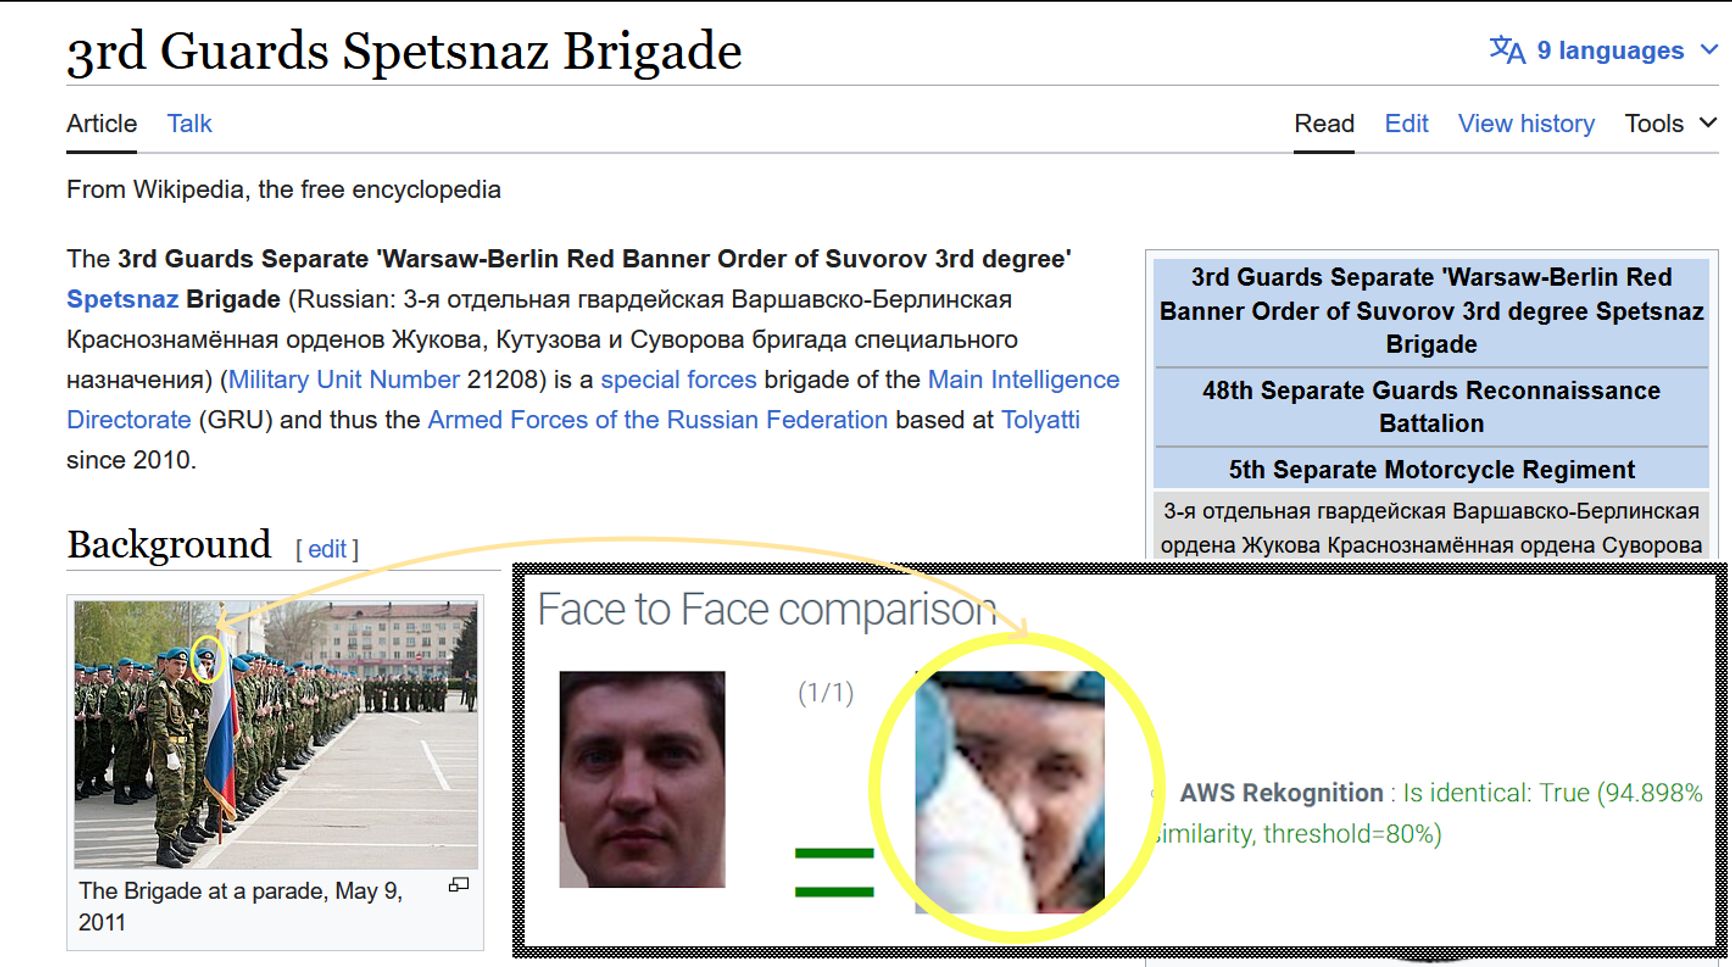 Facial comparison software confirms that “Smirnov” was in uniform at the 3rd Guards Spetsnaz Brigade’s “Victory Day” celebration in 2011.